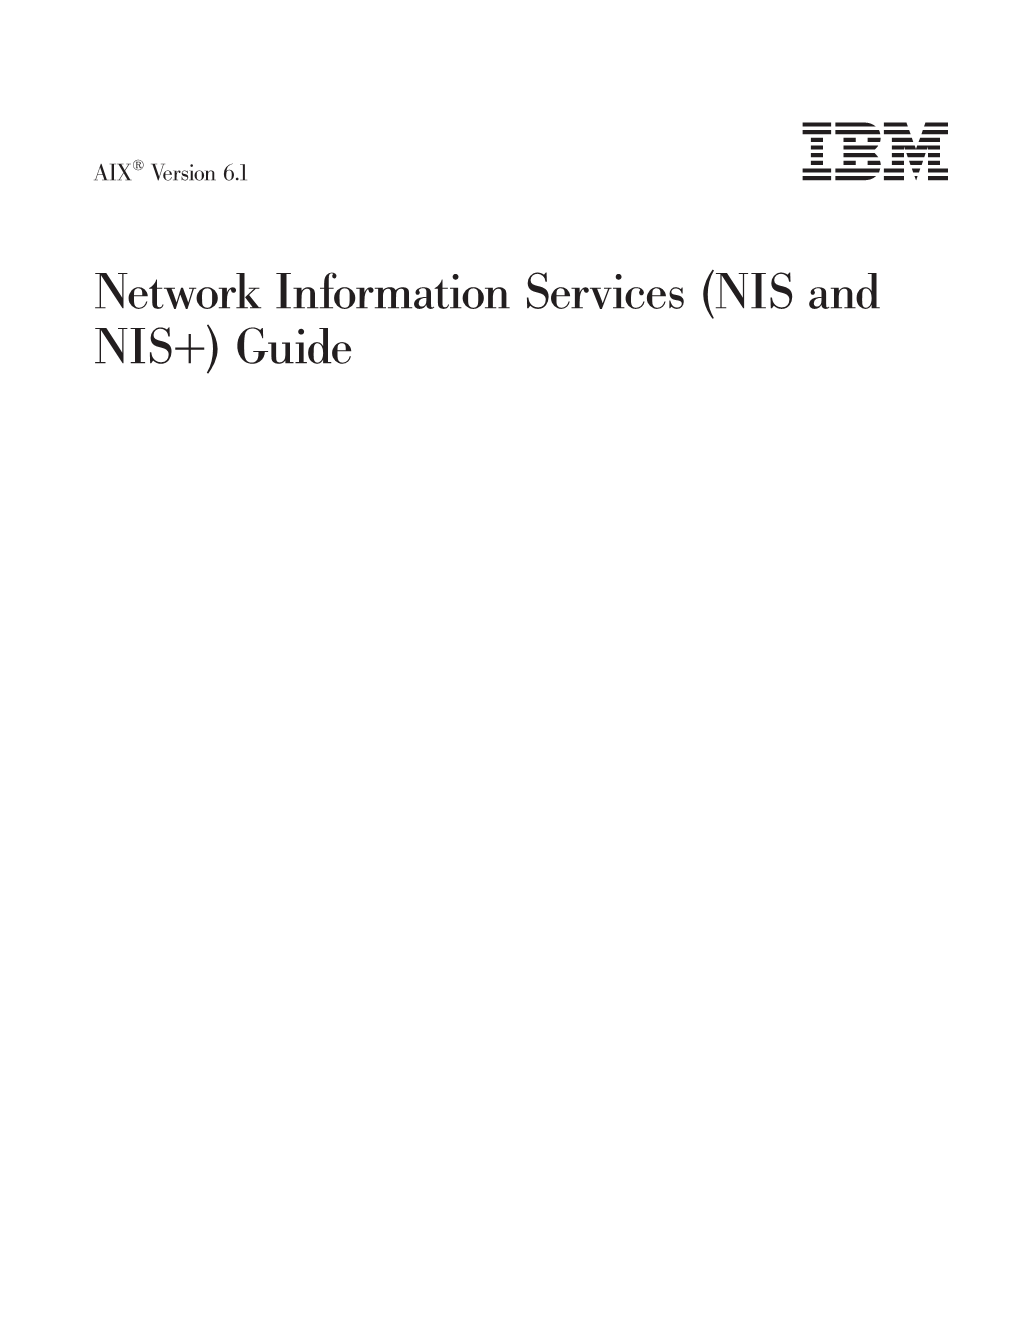 AIX® Version 6.1 Network Information Services (NIS and NIS+) Guide About This Book